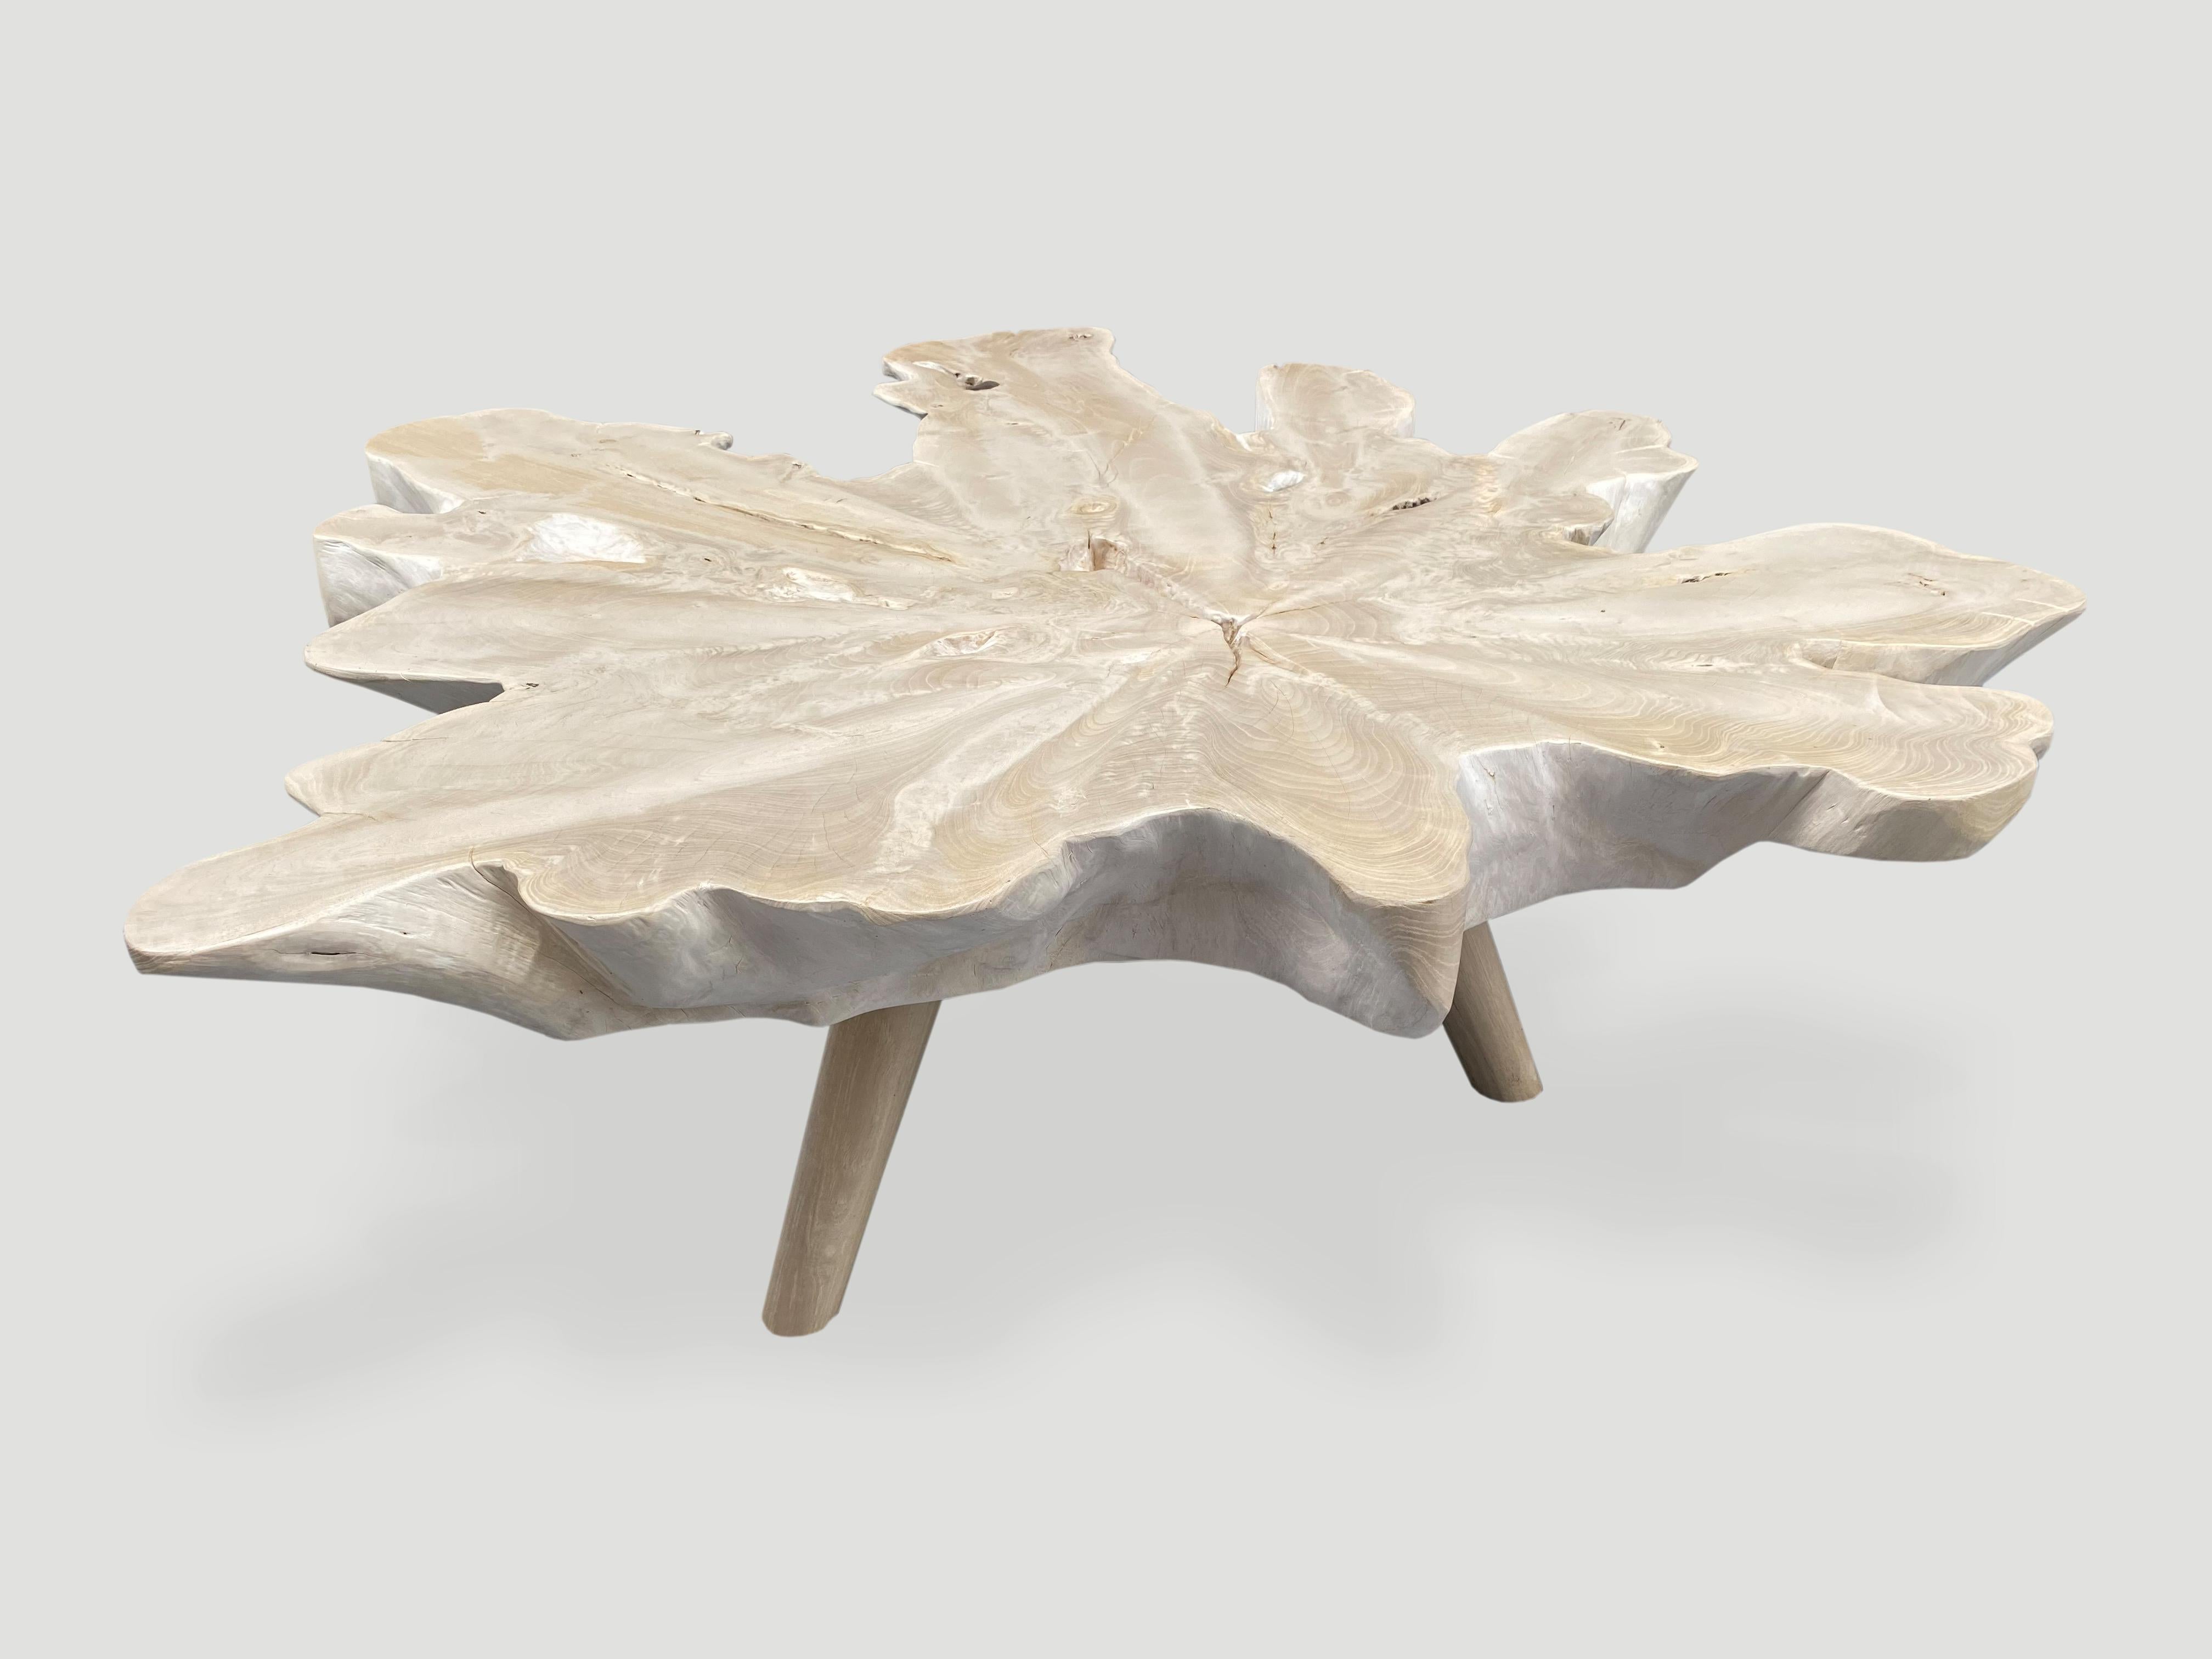 Impressive five inch single slab reclaimed teak wood coffee table. We bleached the teak and added a shellack to the top for protection. Floating on mid century style legs. Organic with a twist. 

The St. Barts Collection features an exciting new